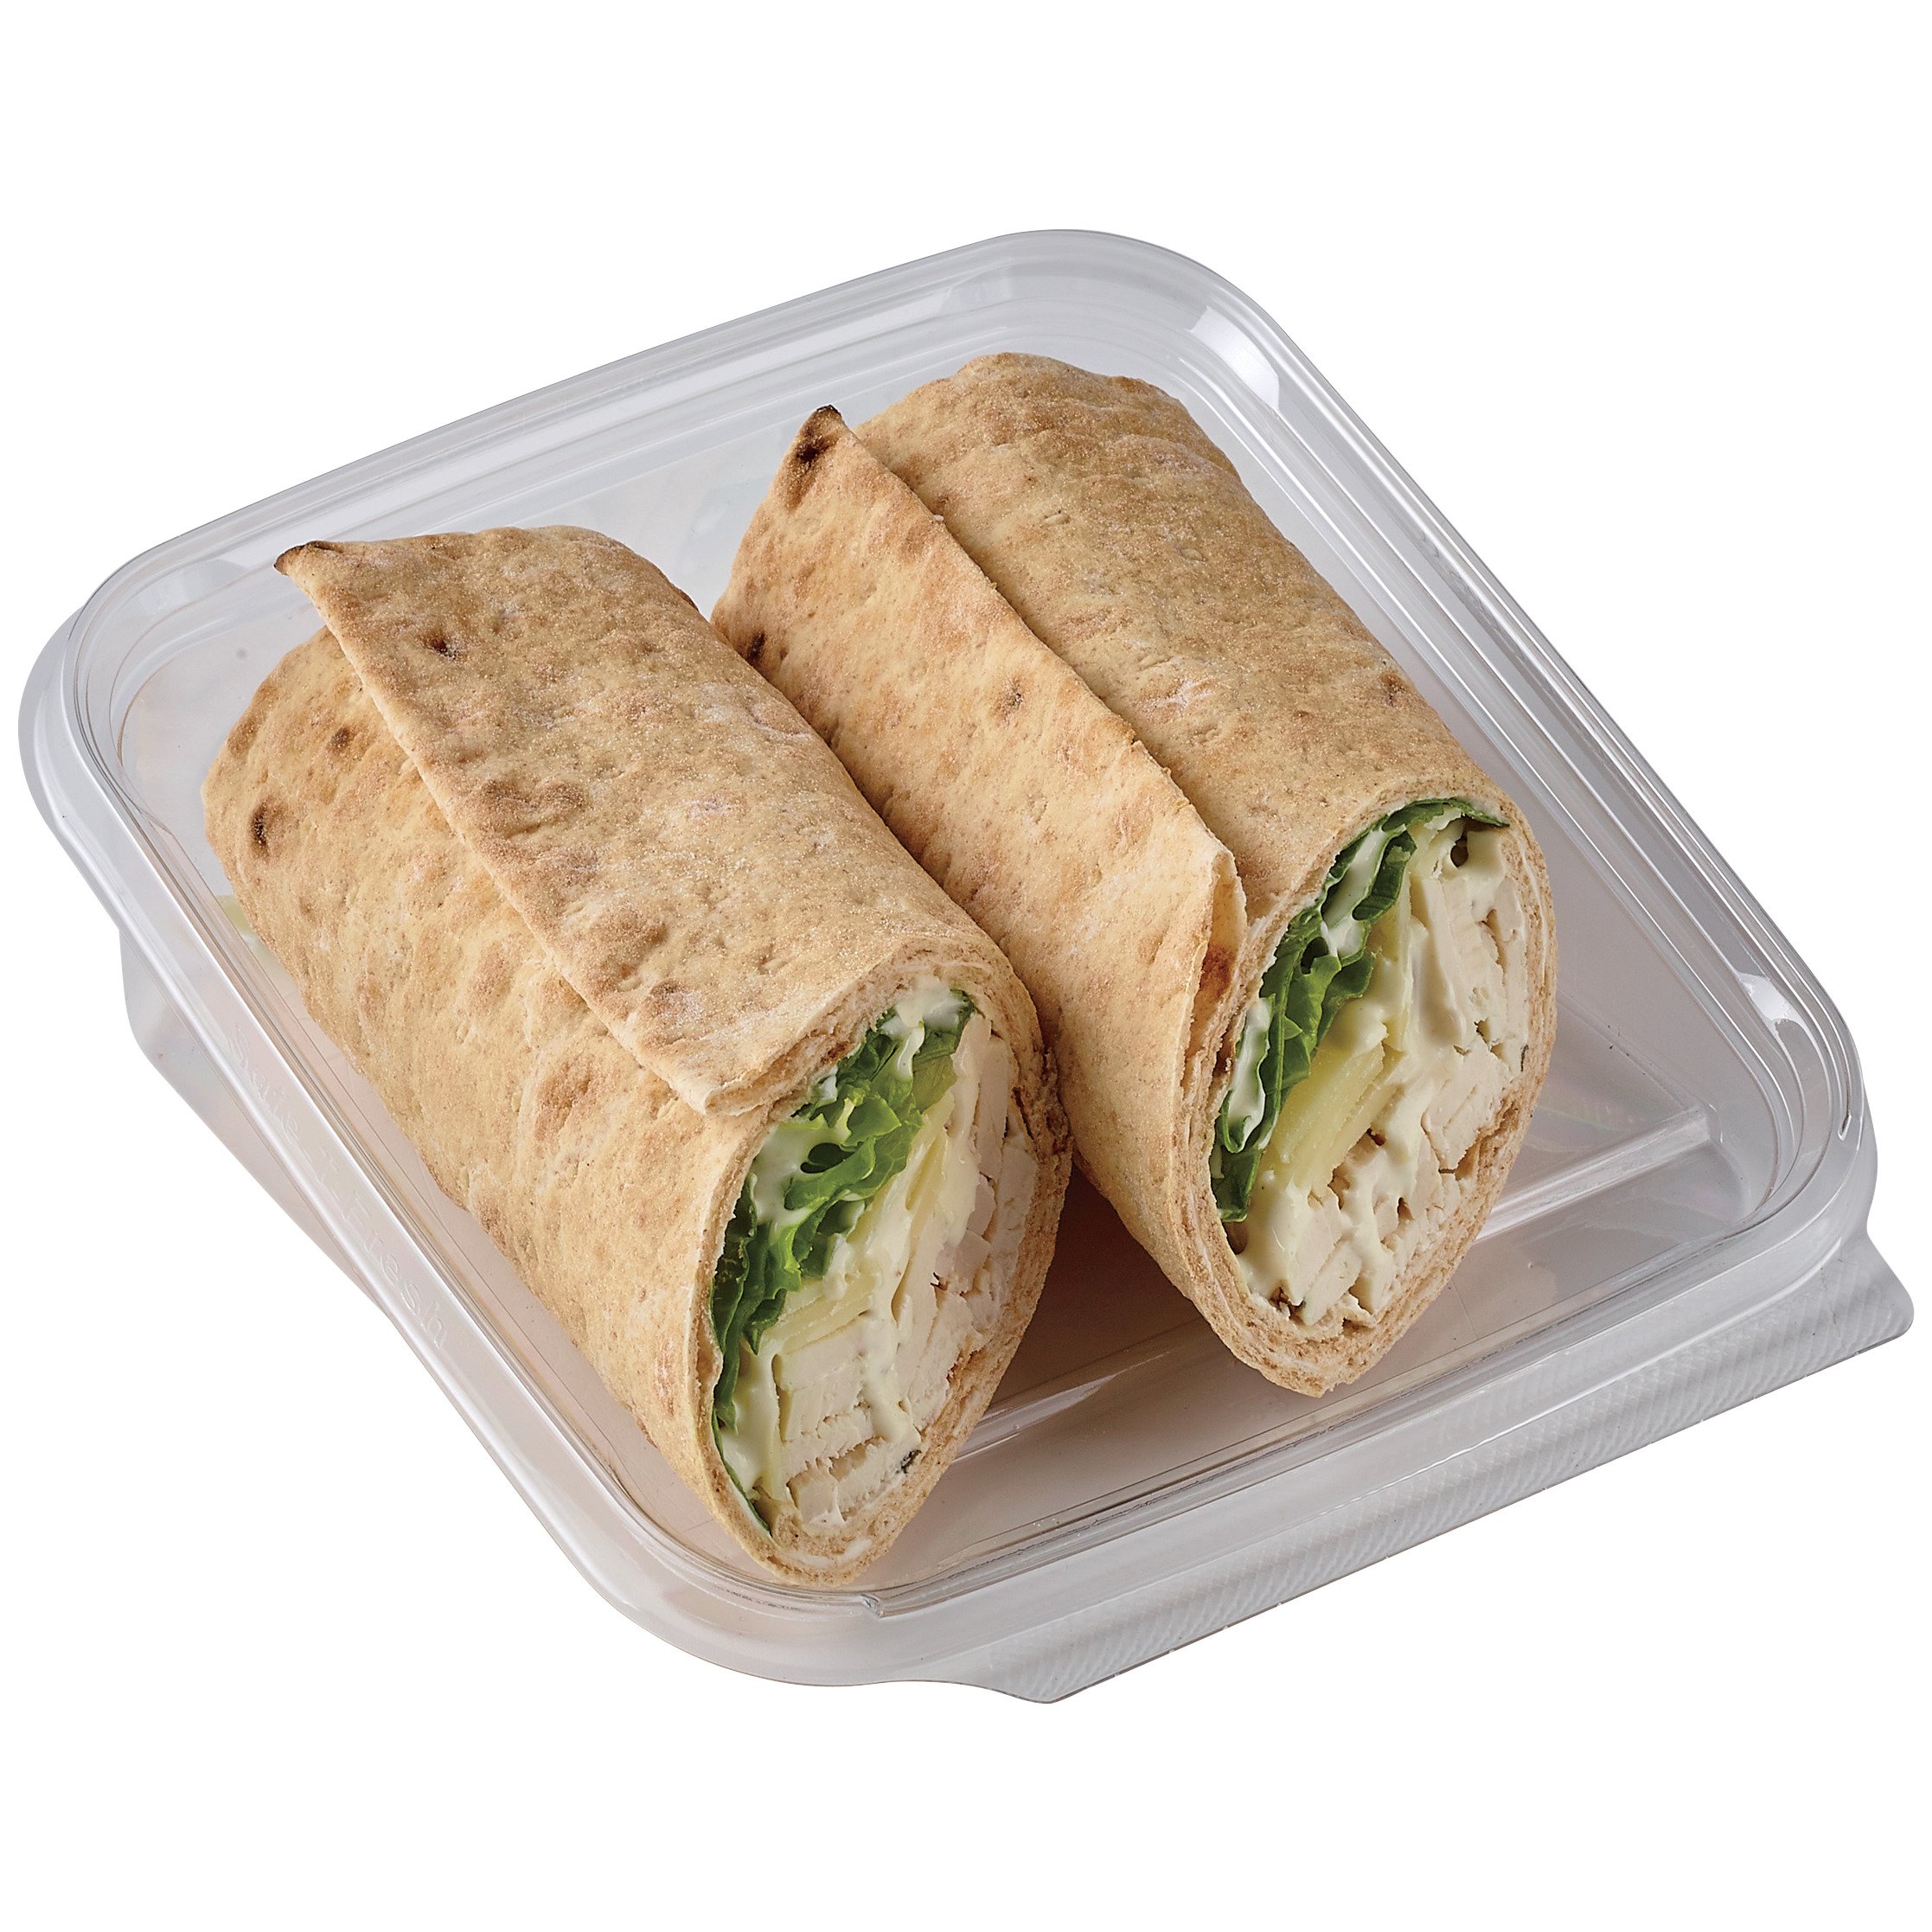 H E B Meal Simple Chicken Caesar Wrap With Caesar Dressing Shop Sandwiches At H E B